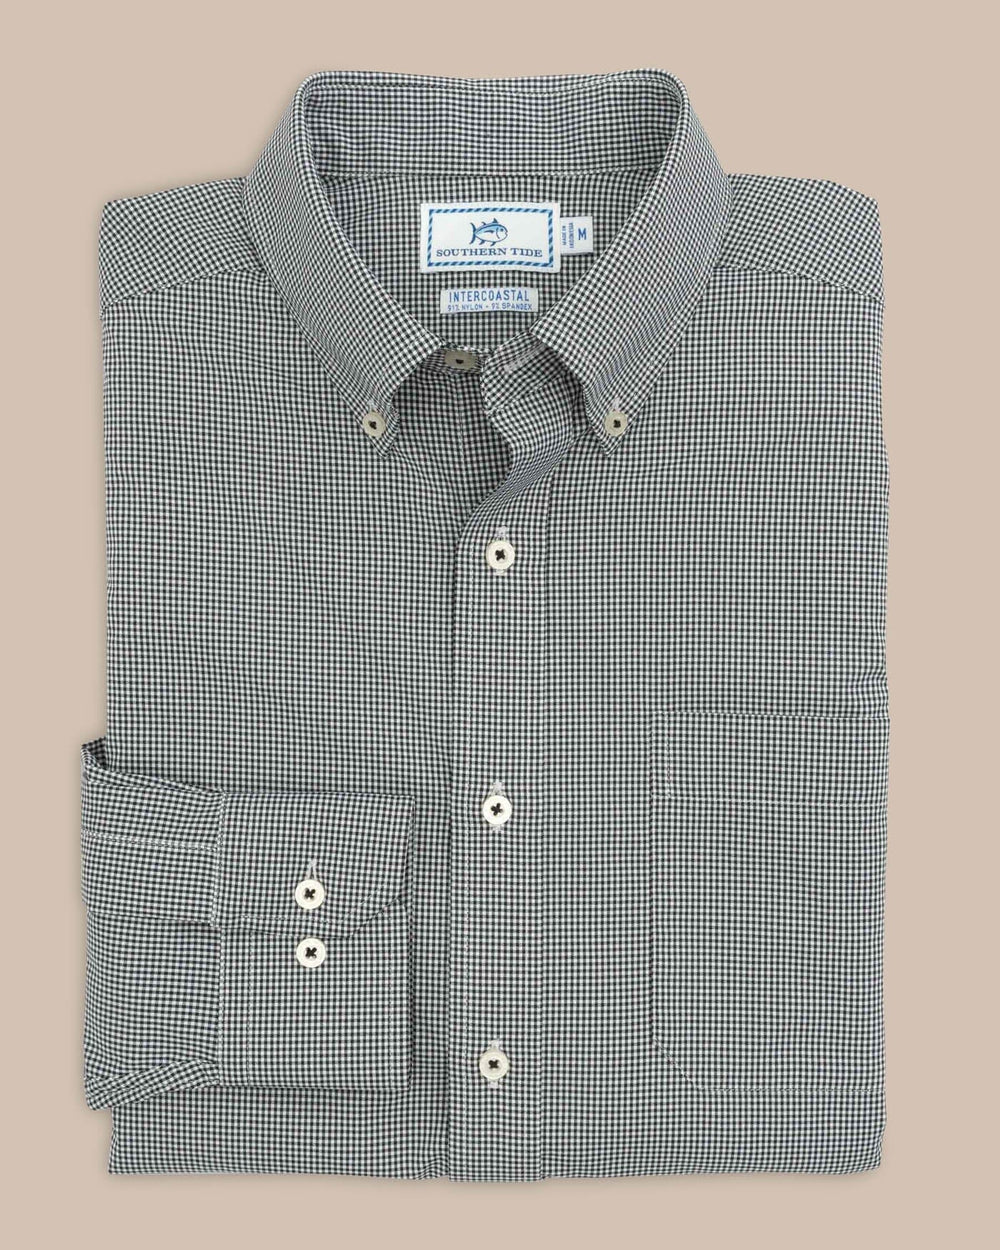 The front view of the Southern Tide Team Colors Gingham Intercoastal Sport Shirt by Southern Tide - Black